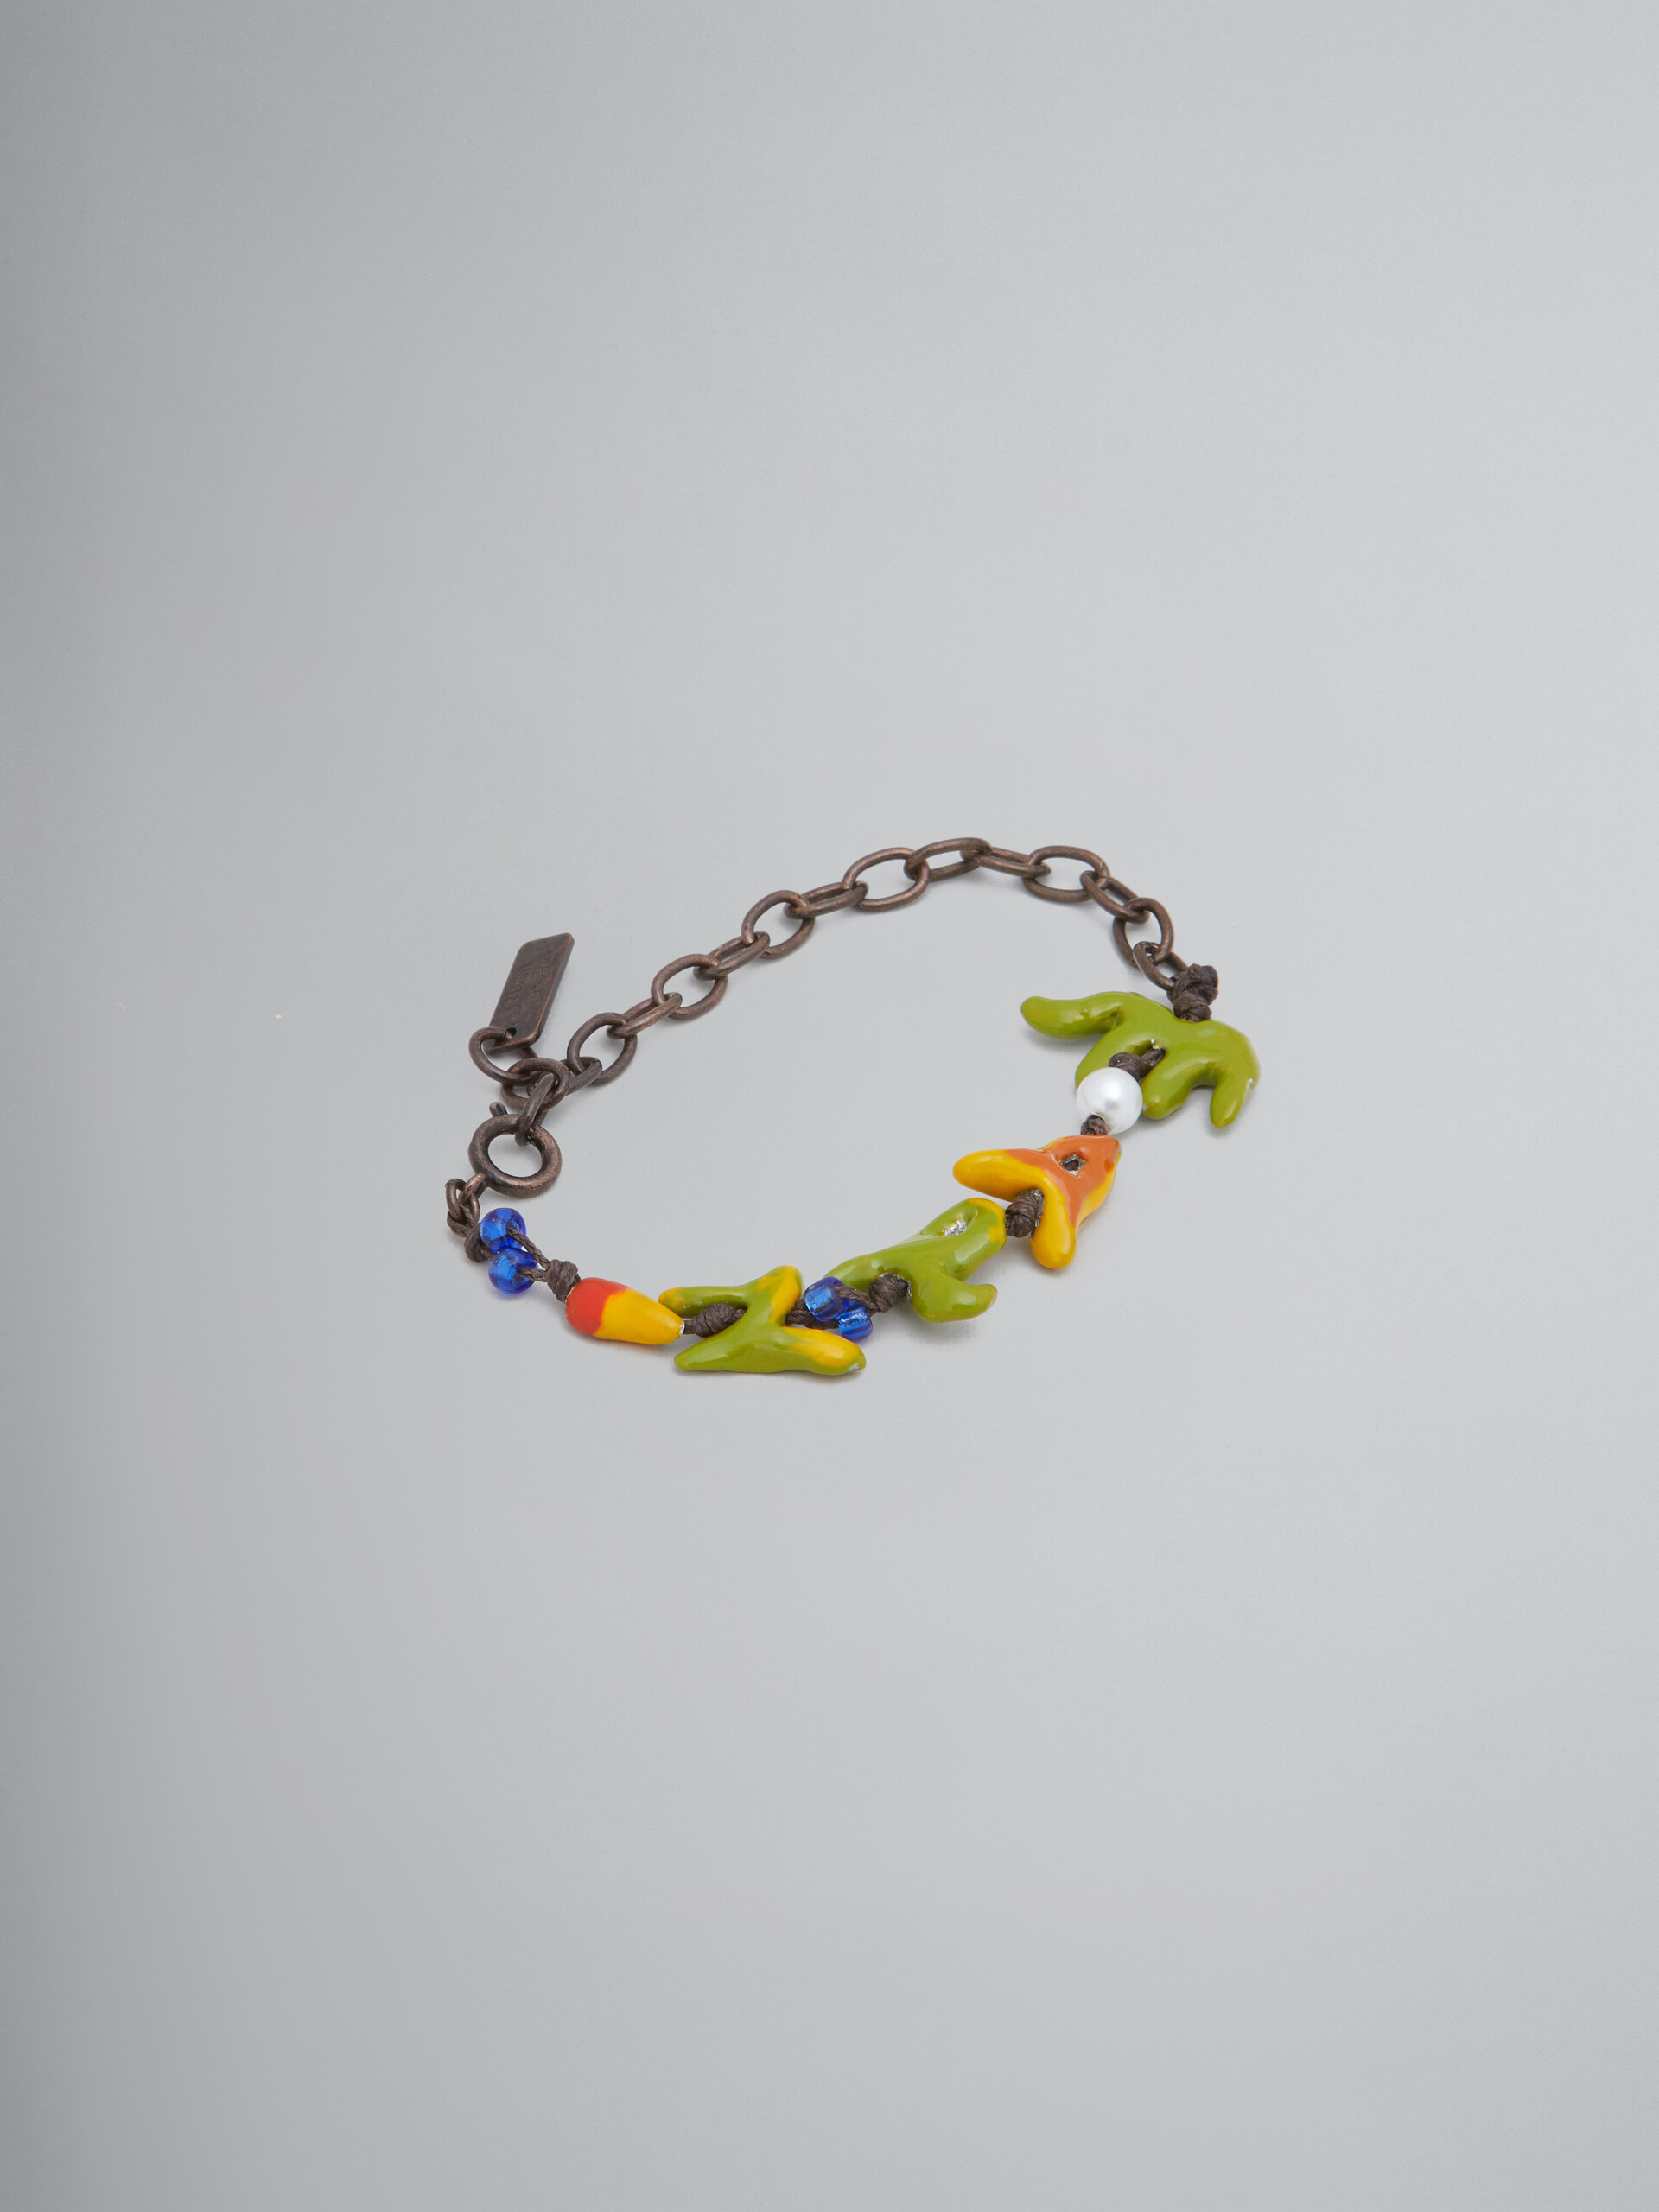 Marni x No Vacancy Inn - Bracelet with green red and yellow pendants - Bracelets - Image 1